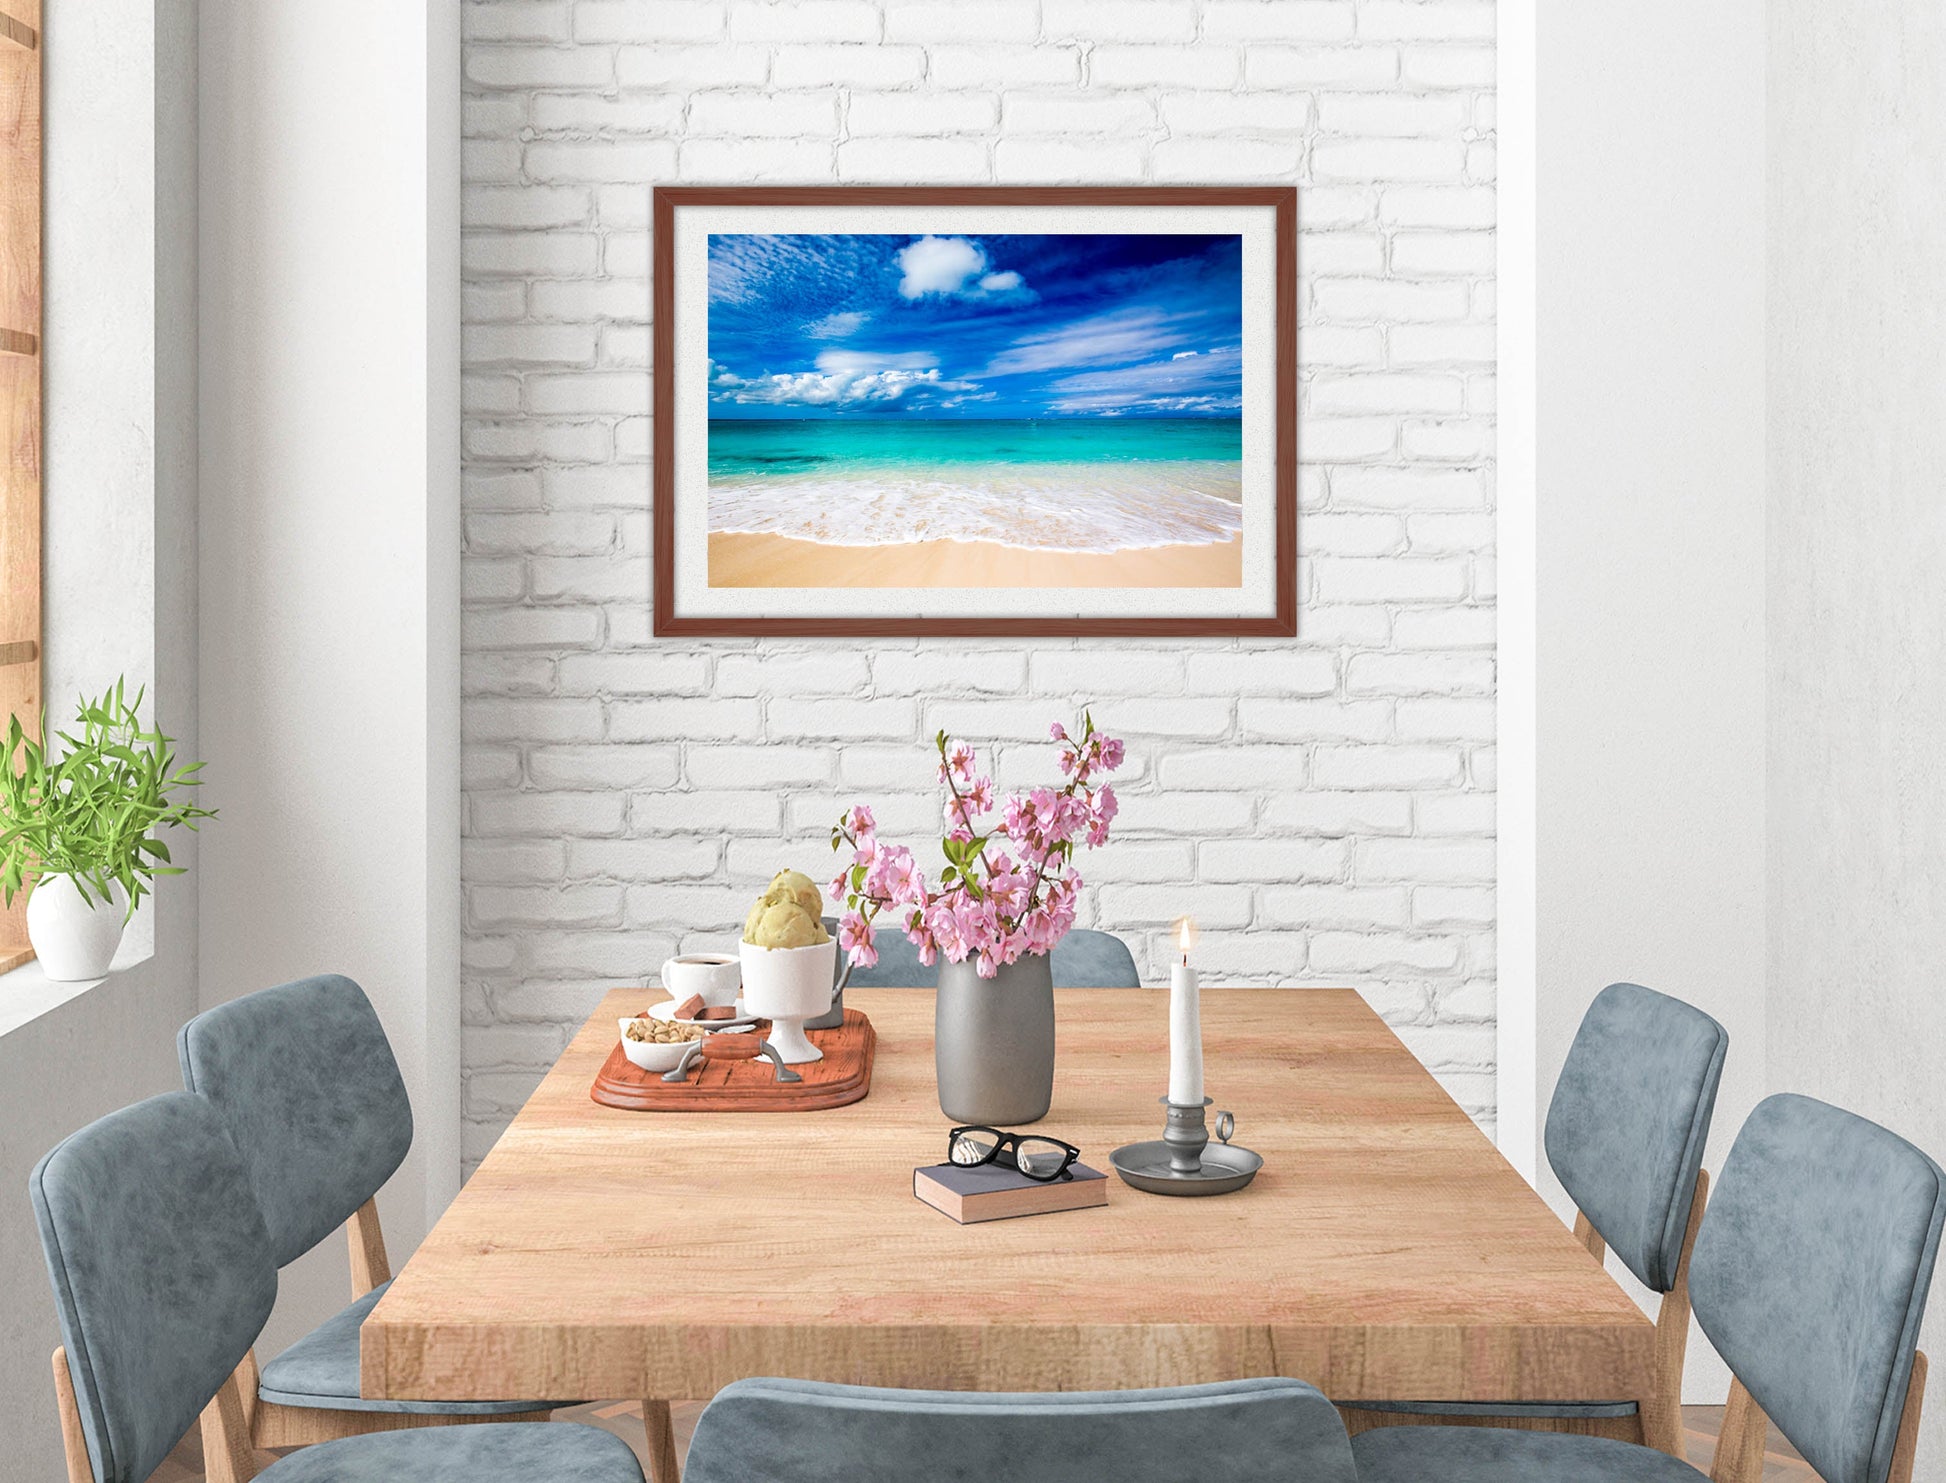 White Sand Beach - Evening on the Pond - Framed Photo - Mahogany on Dining Room Room Wall